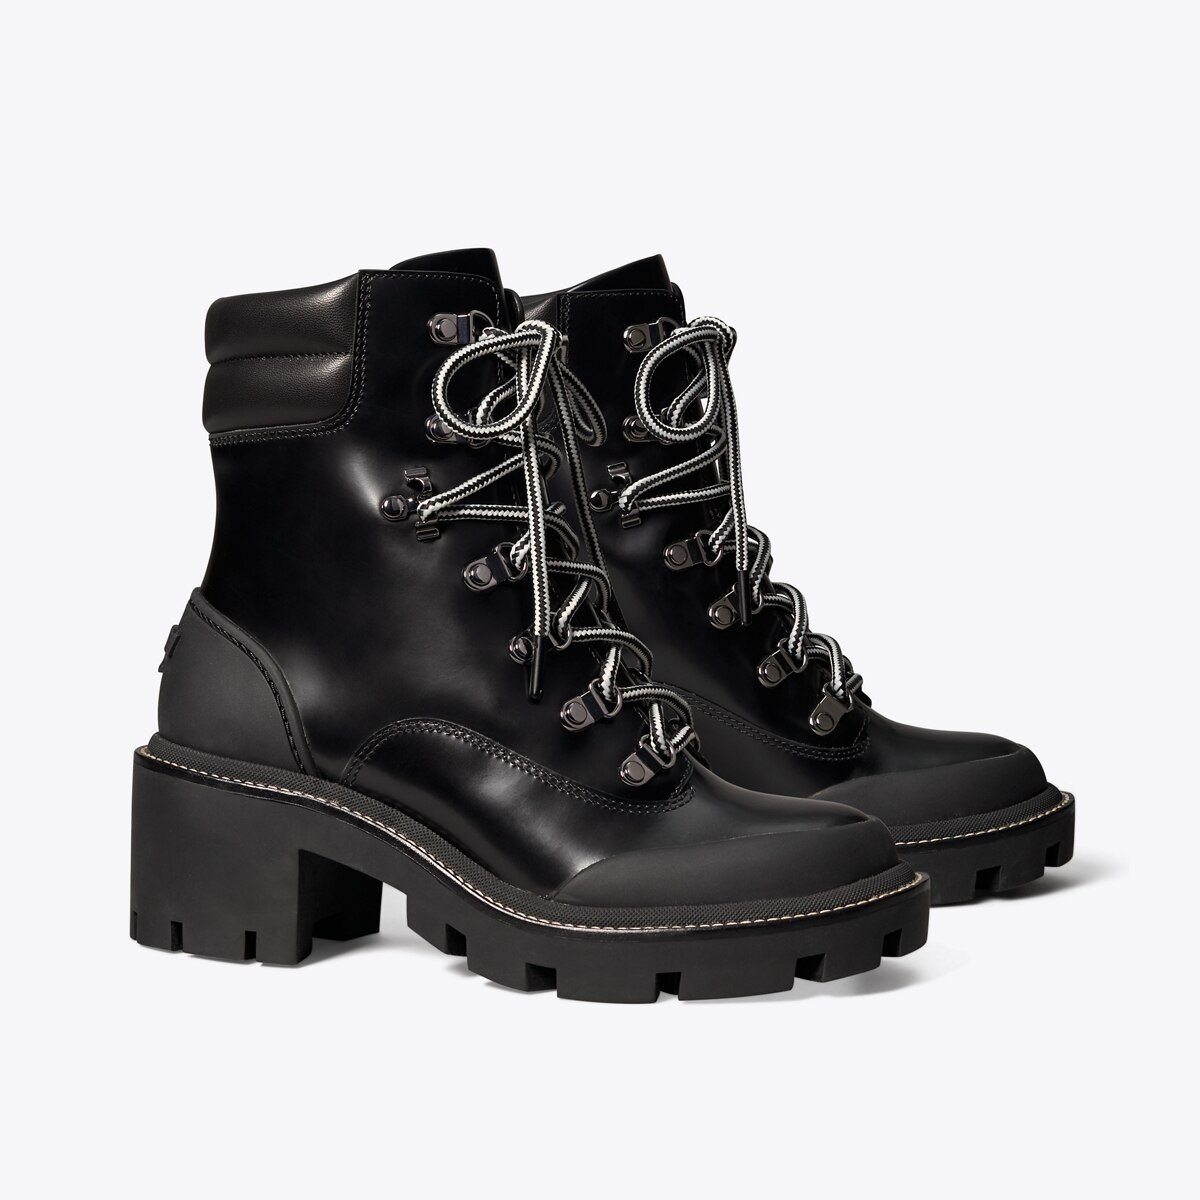 Lug-Sole Hiker Ankle Boot: Women's Designer Ankle Boots | Tory Burch